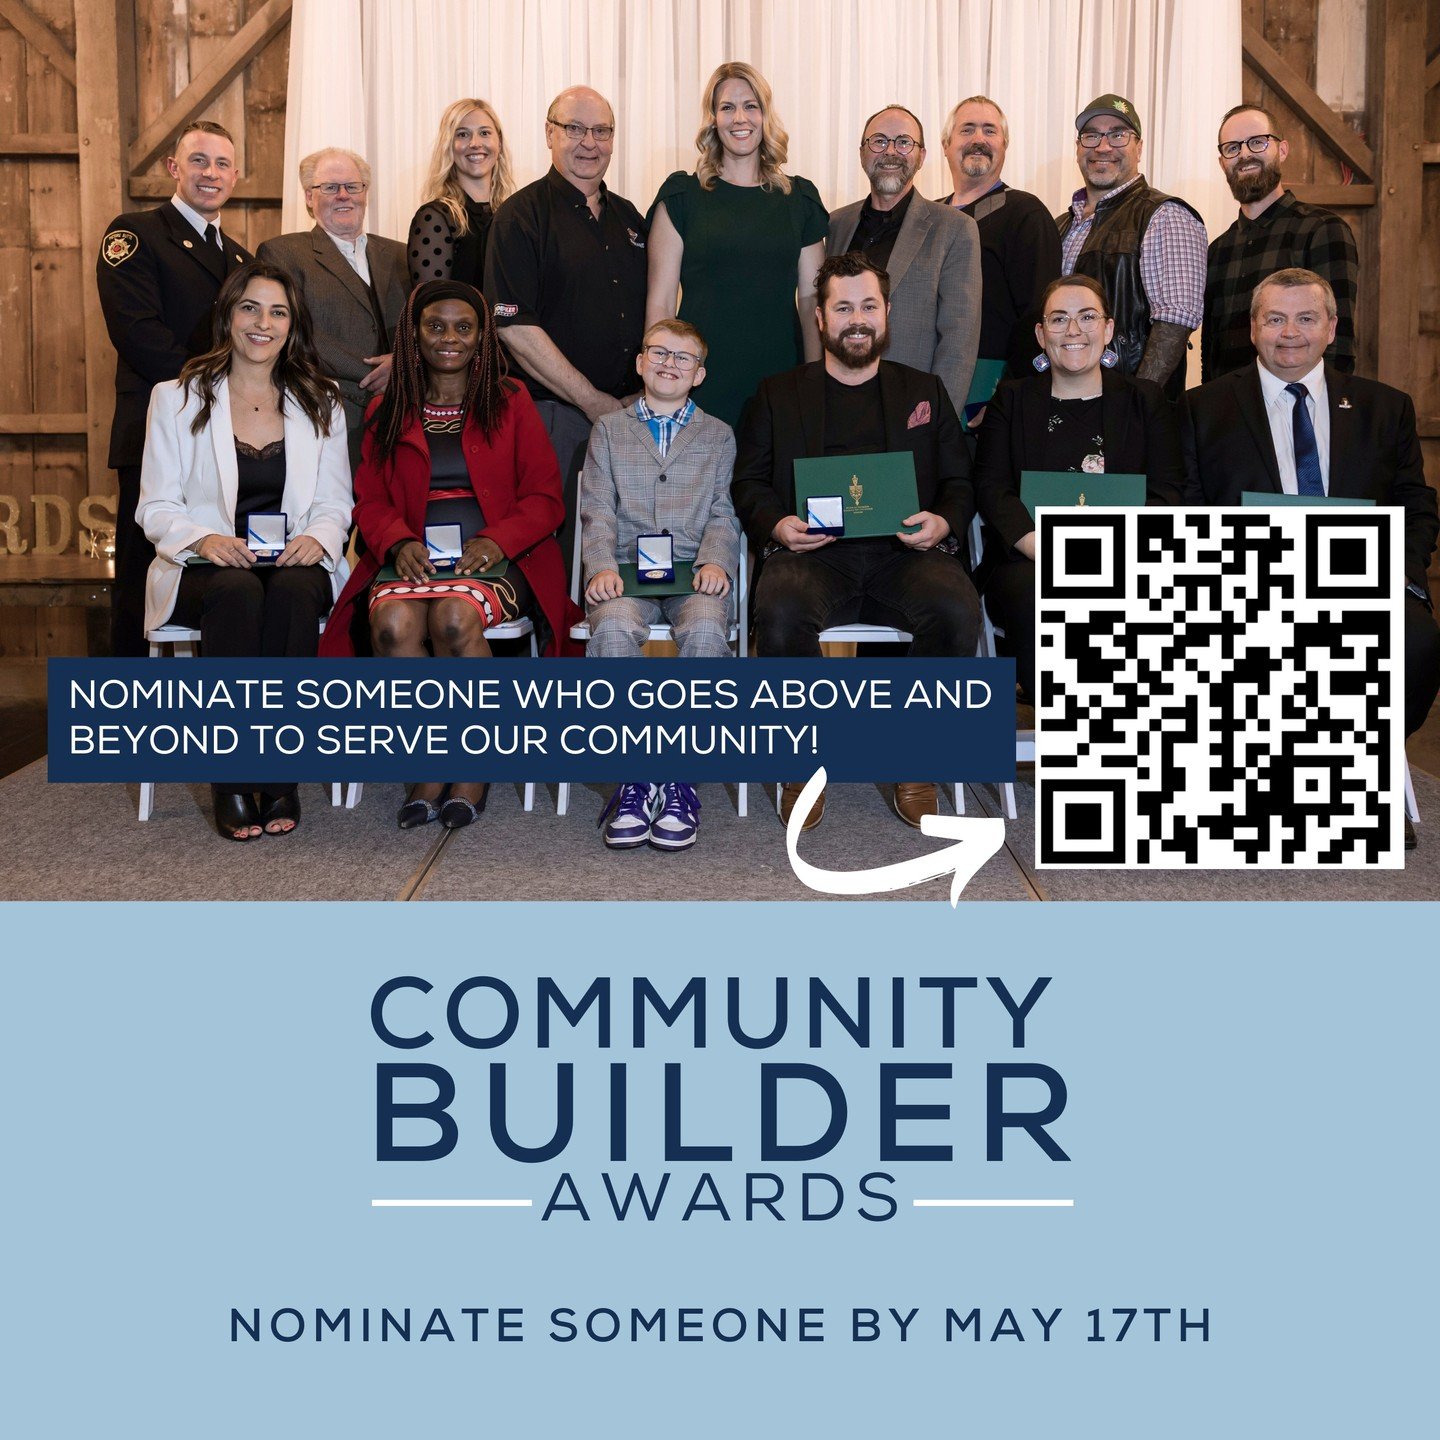 Do you know someone who goes above and beyond to make a positive impact? 💫

Why not take a moment to nominate them for a Community Builders Award? 🏆

Nominations are due by May 17th! Click the link in my bio or below to learn more👇🏻

https://www.